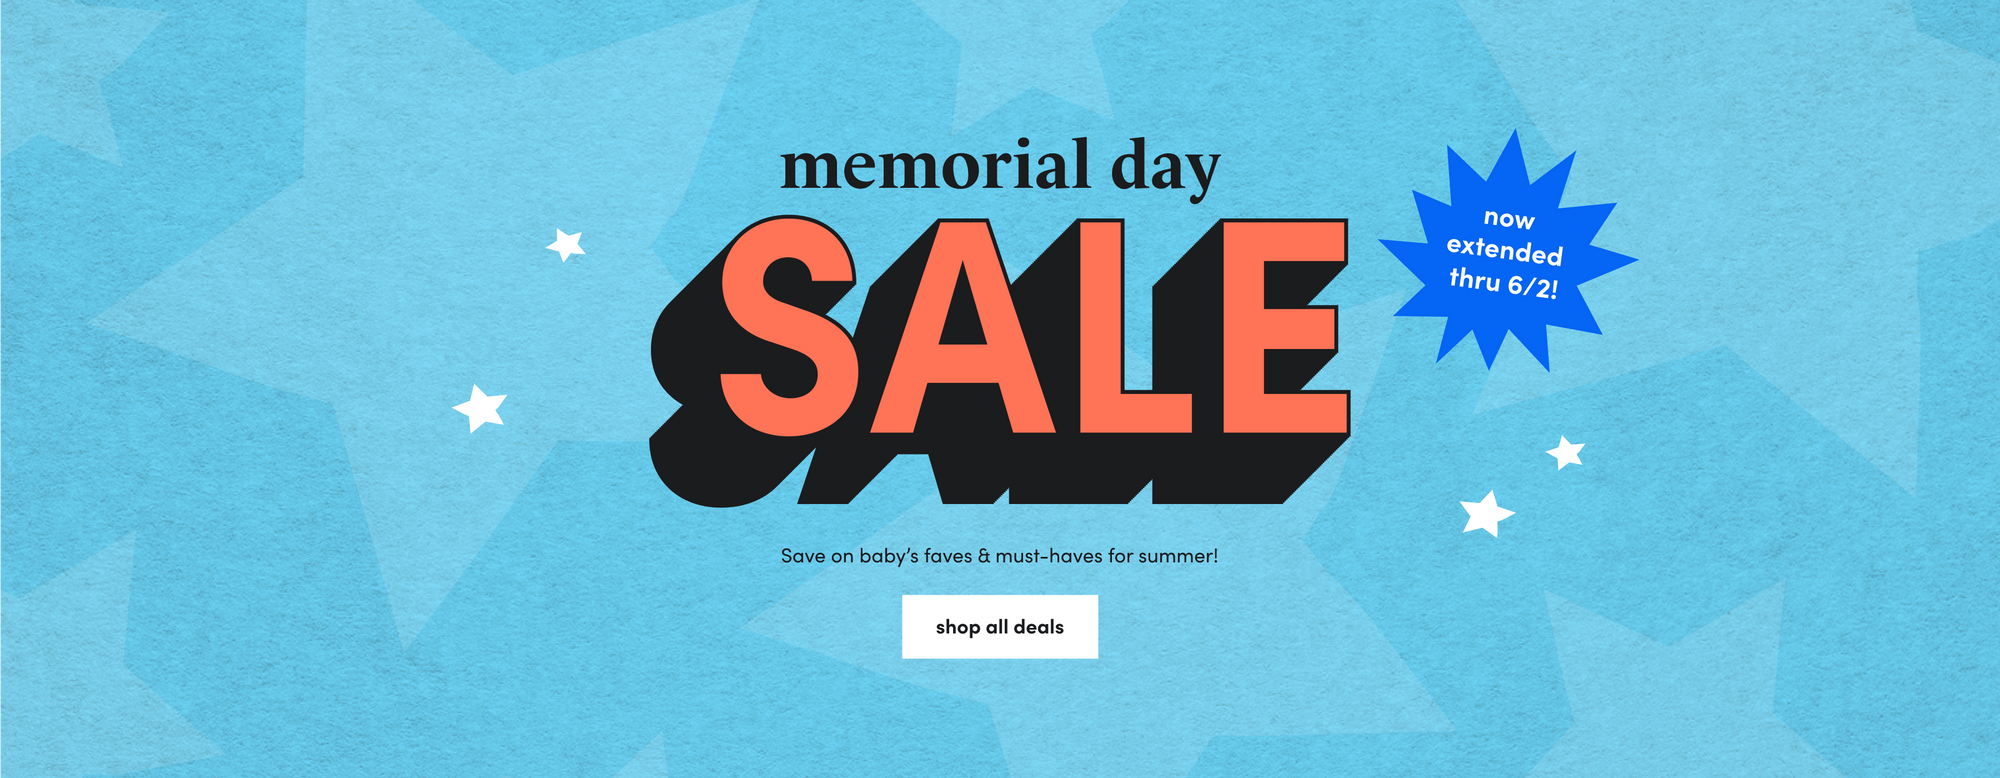 memorial day SALE now extended thru 6/2! shop all deals